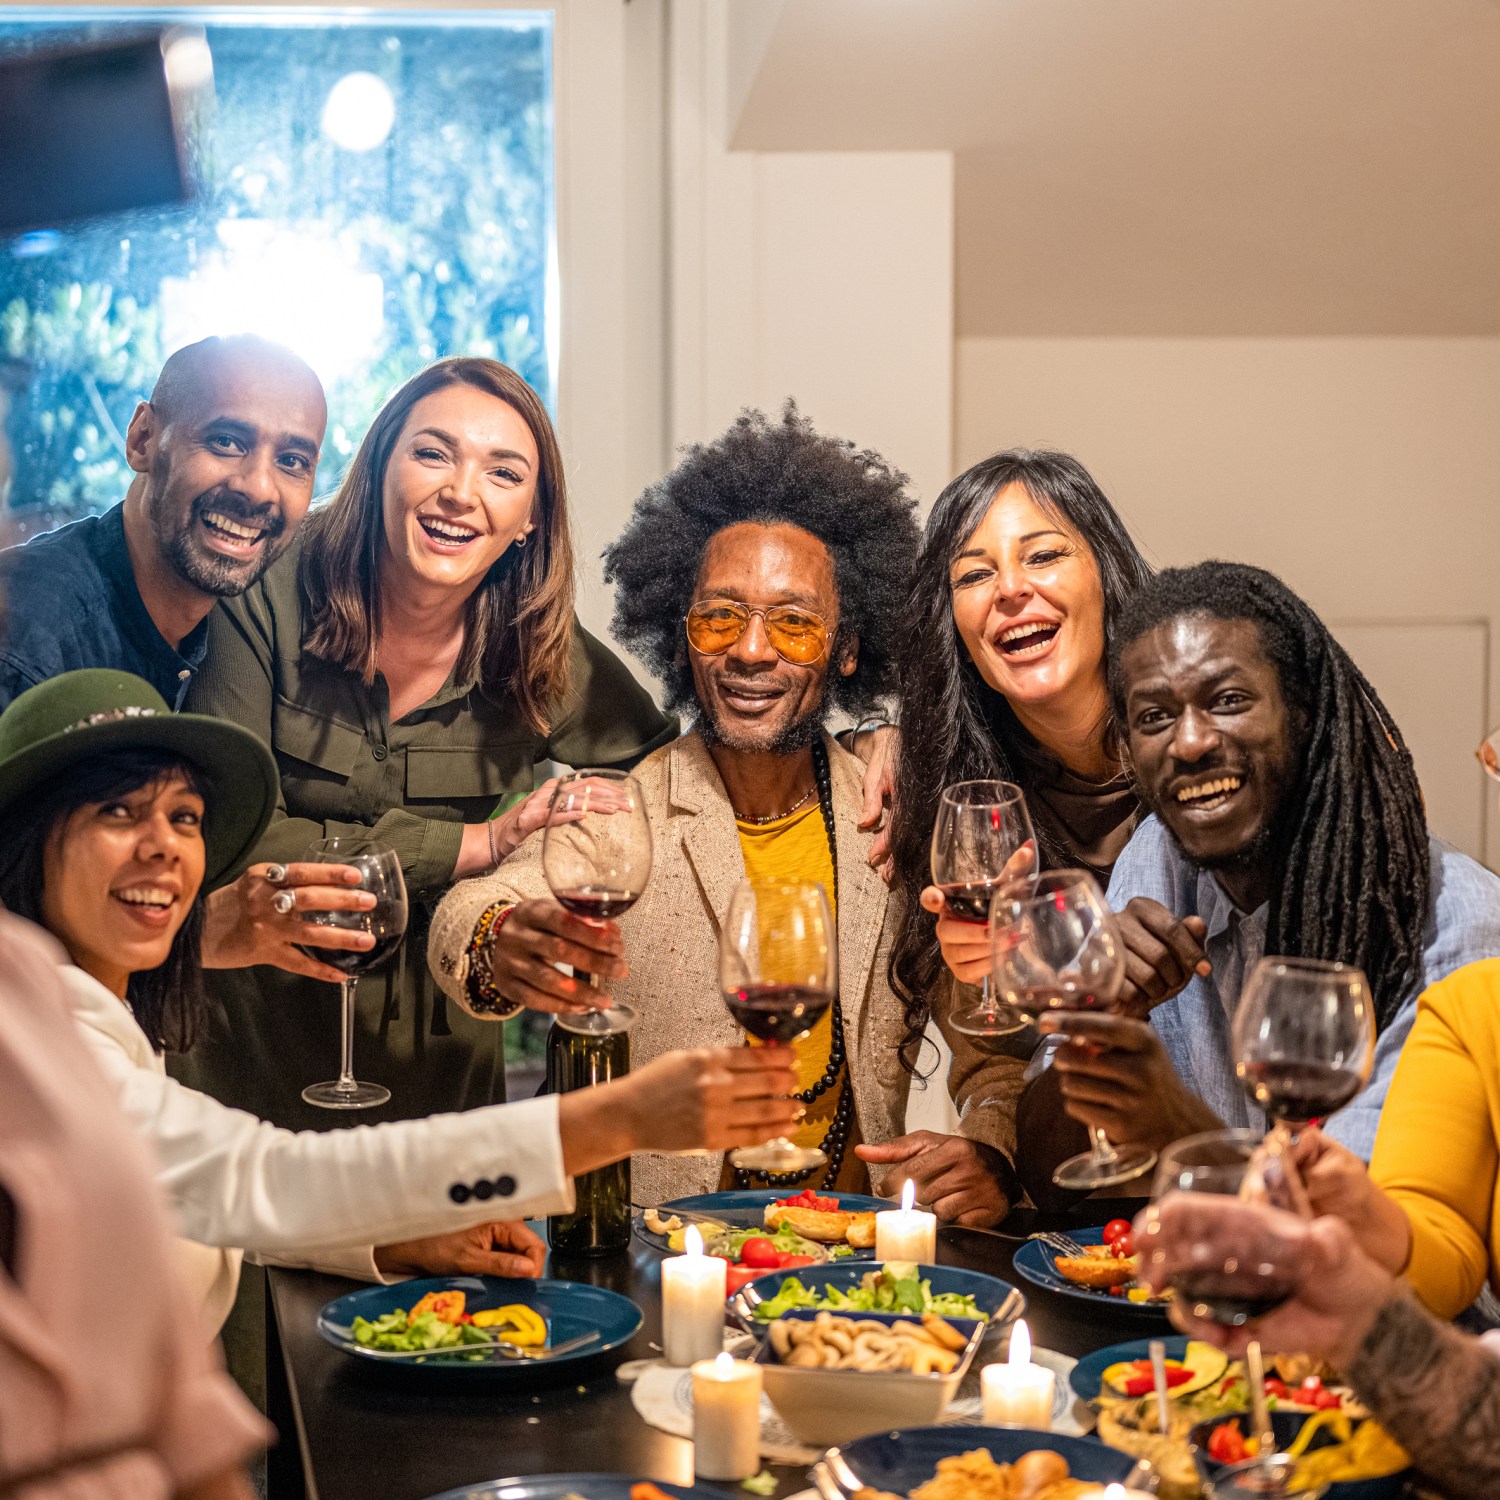 group of friends taking a selfie at dinner party toasting the celebration with holiday vibes